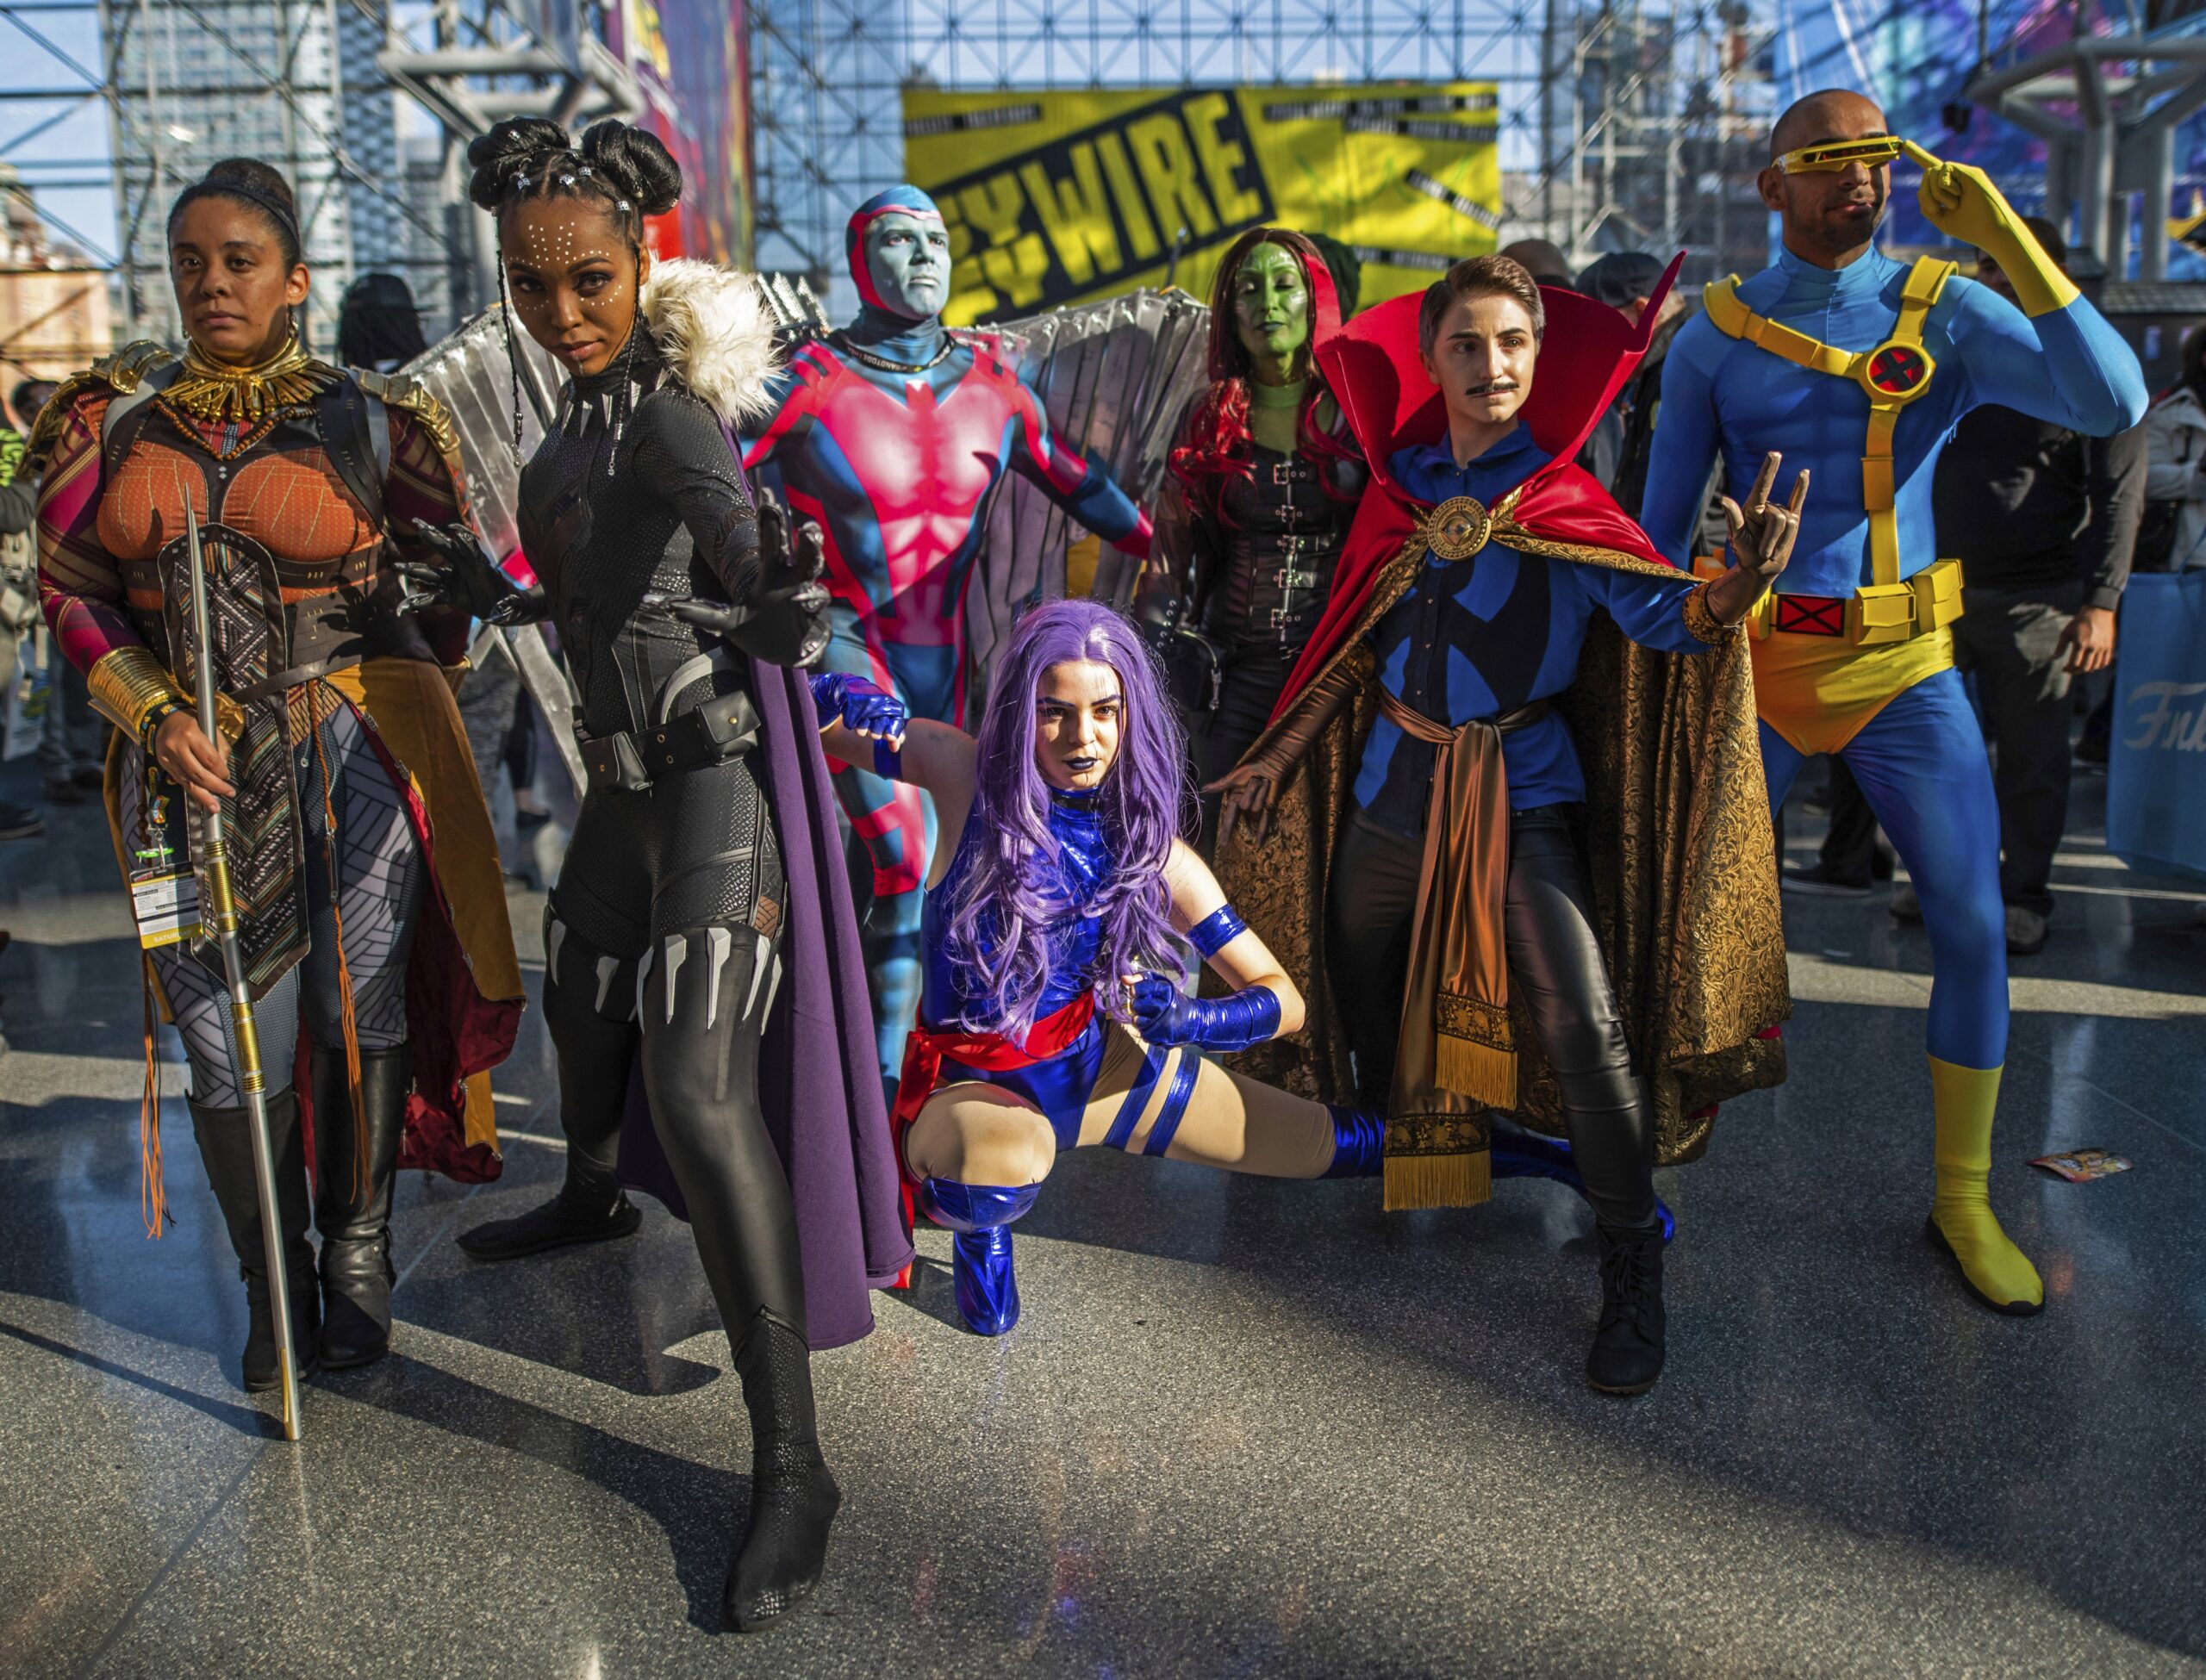 Costumed Superheroes at Convention